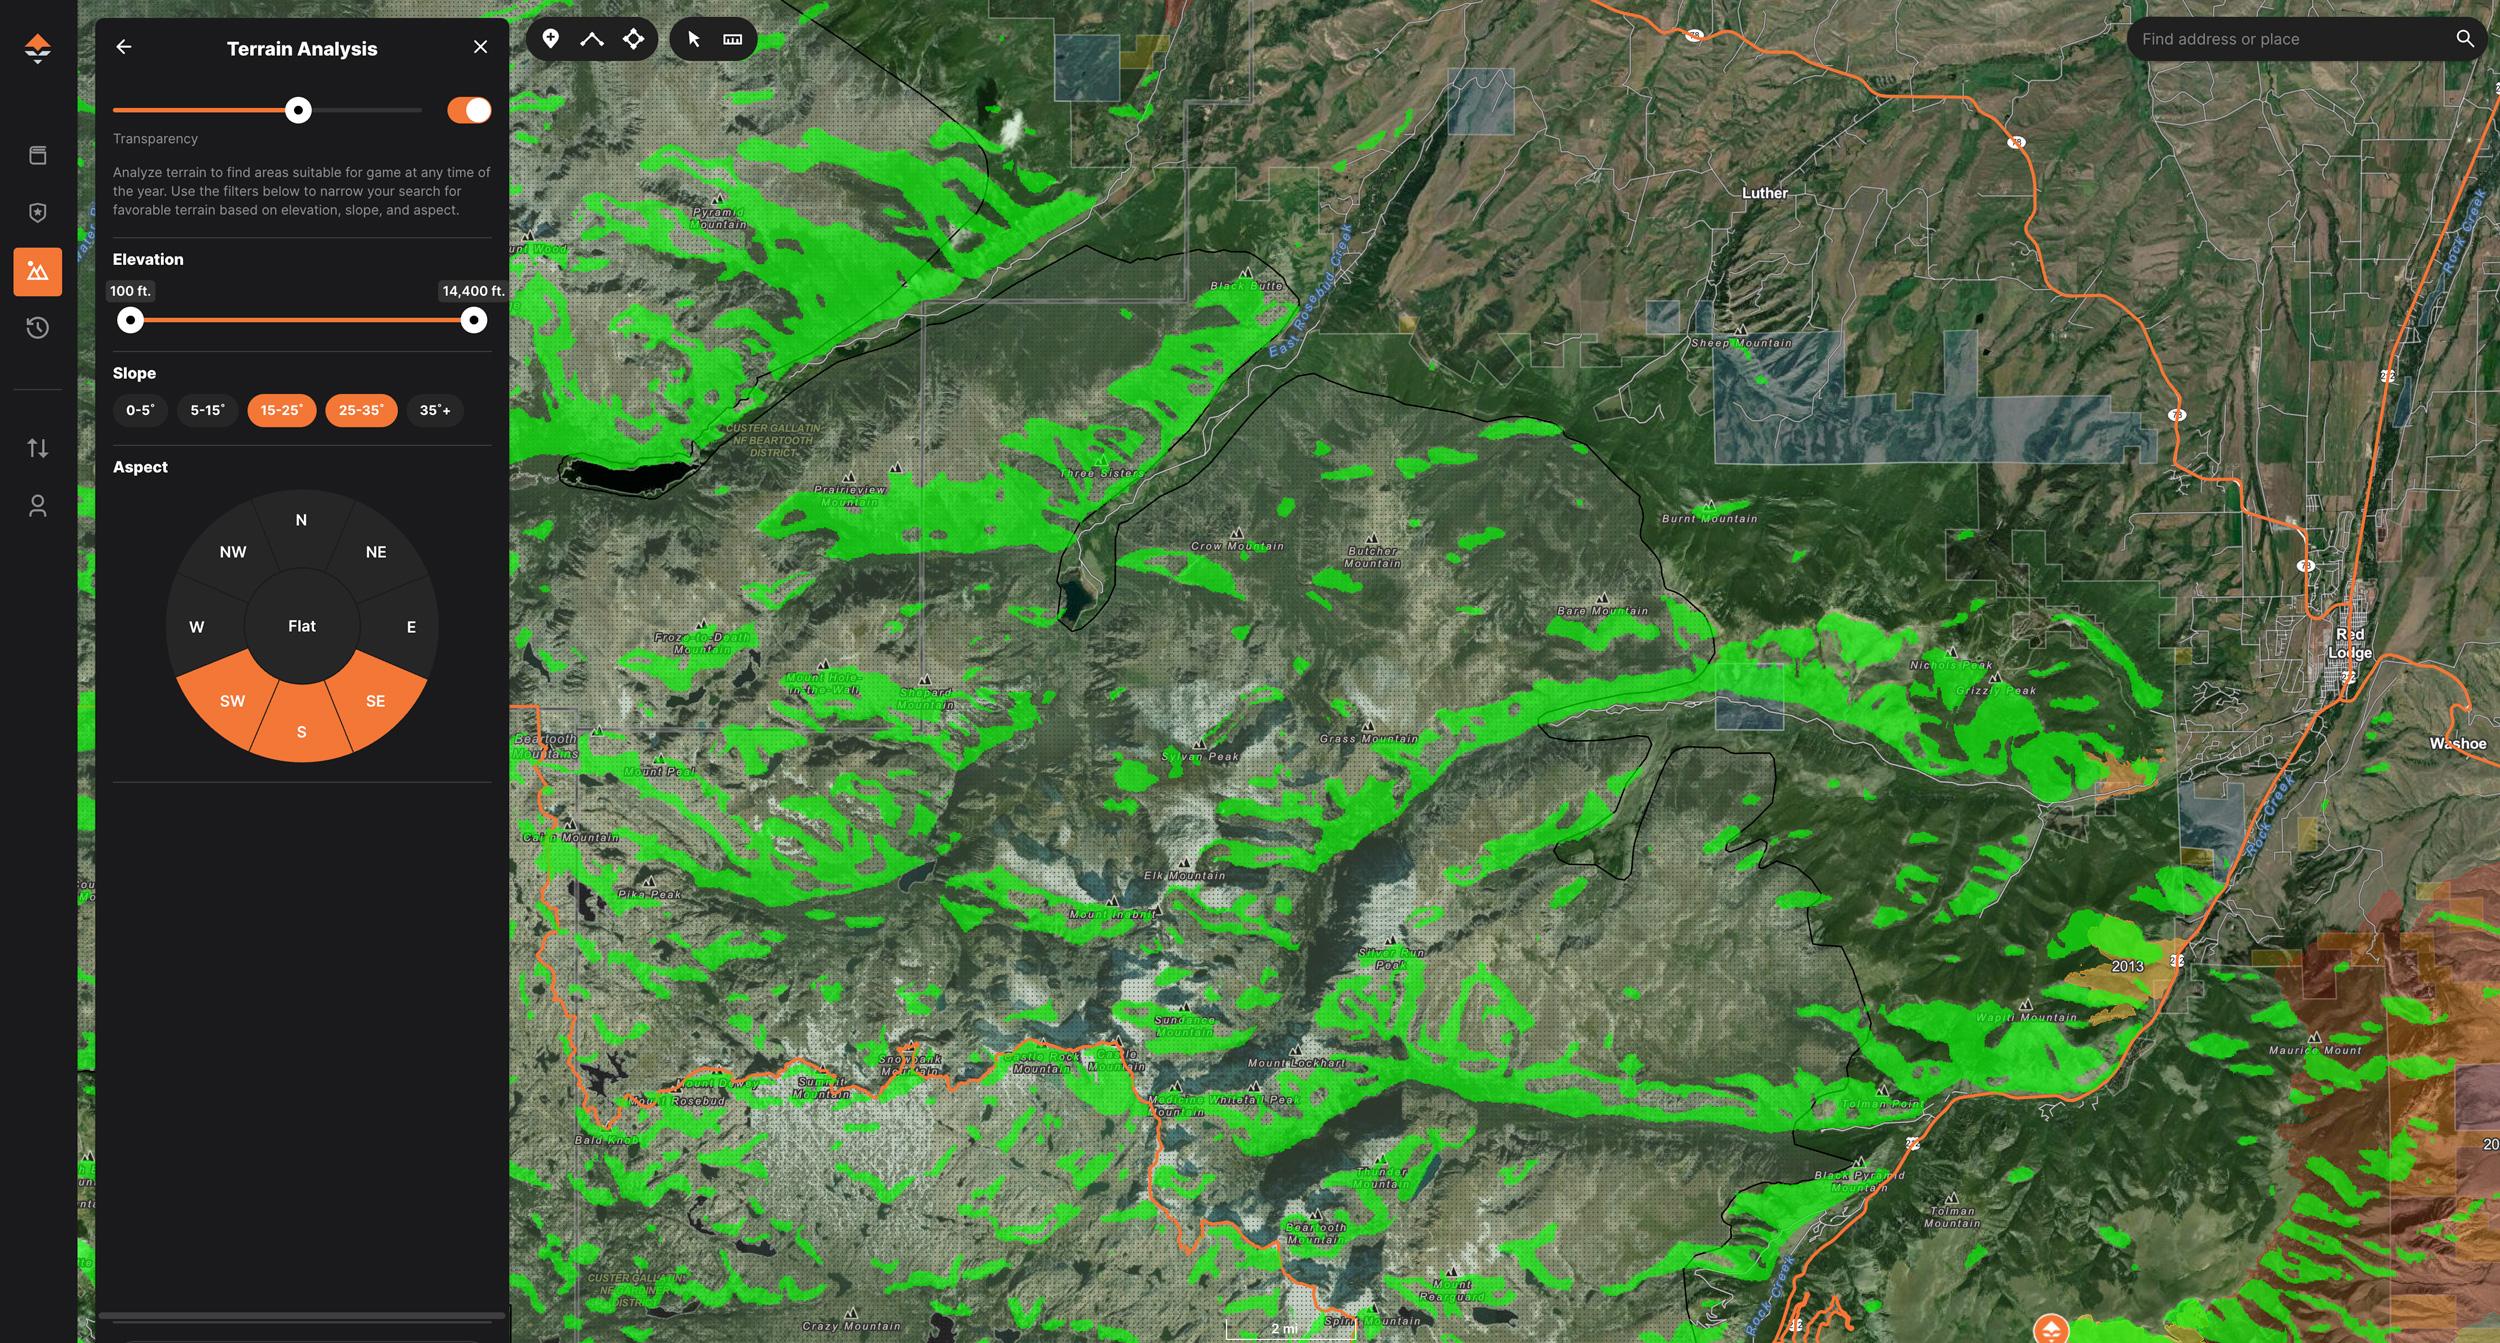 Isolating Terrain Analysis to only show slope angles from 15 to 35 degrees for spring bears